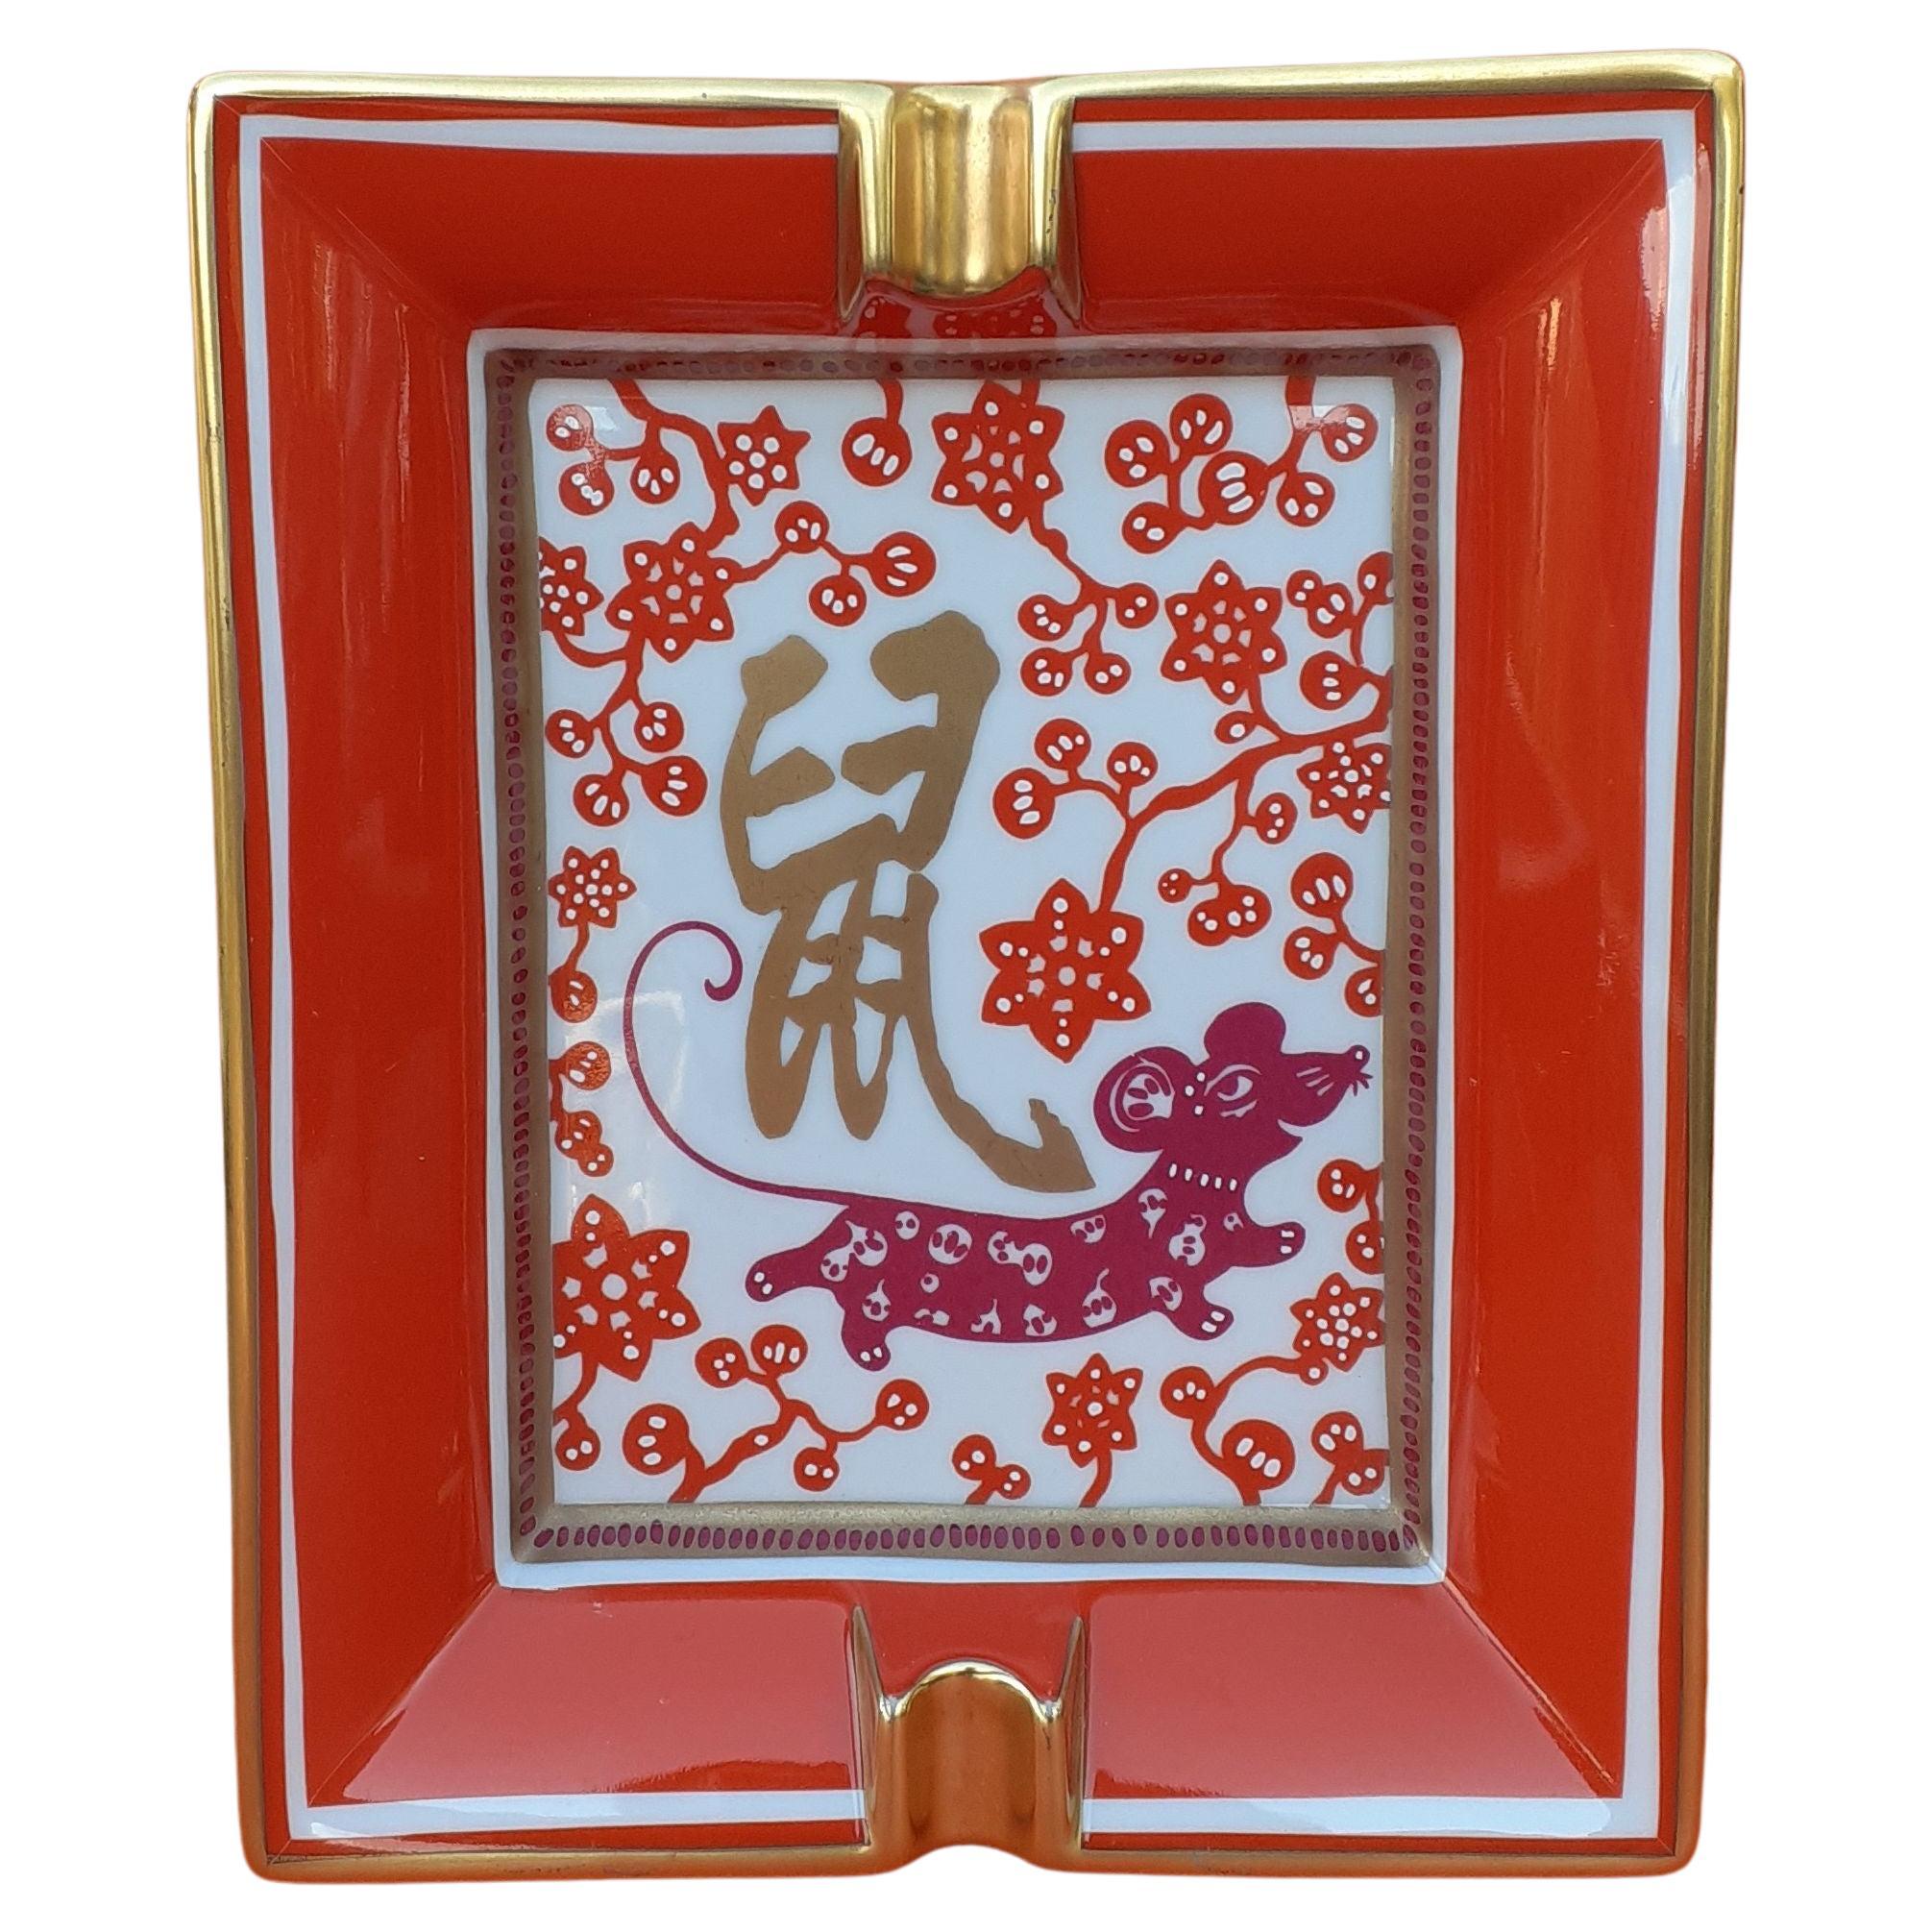 Hermès Ashtray Change Tray Chinese Astrology Year of The Rat In Porcelain